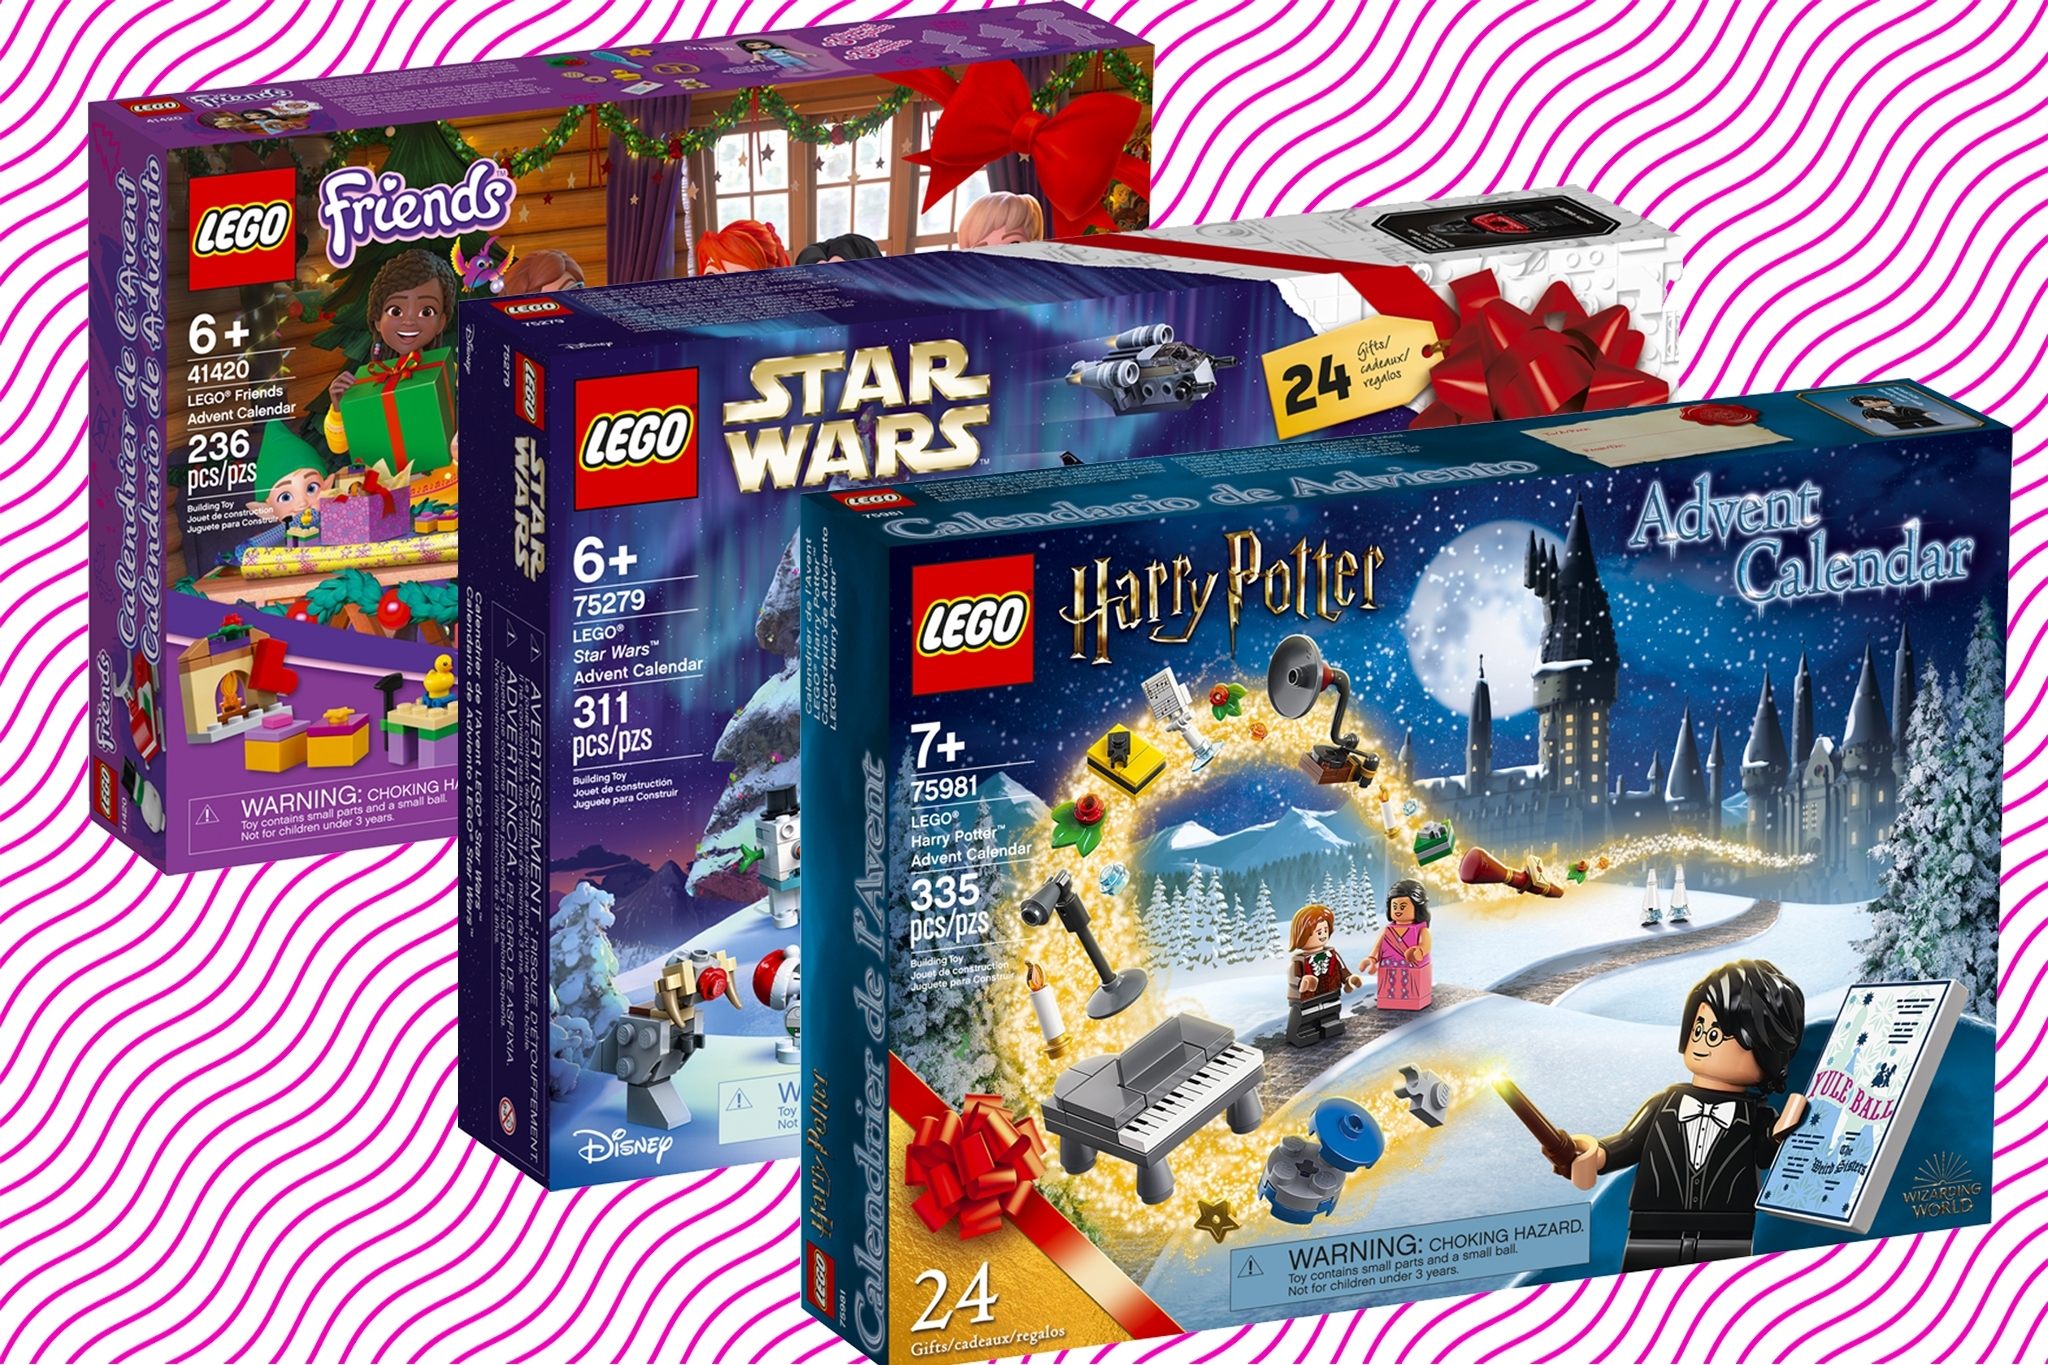 Lego Has 4 Advent Calendars And 3 Of Them Are Super Cool